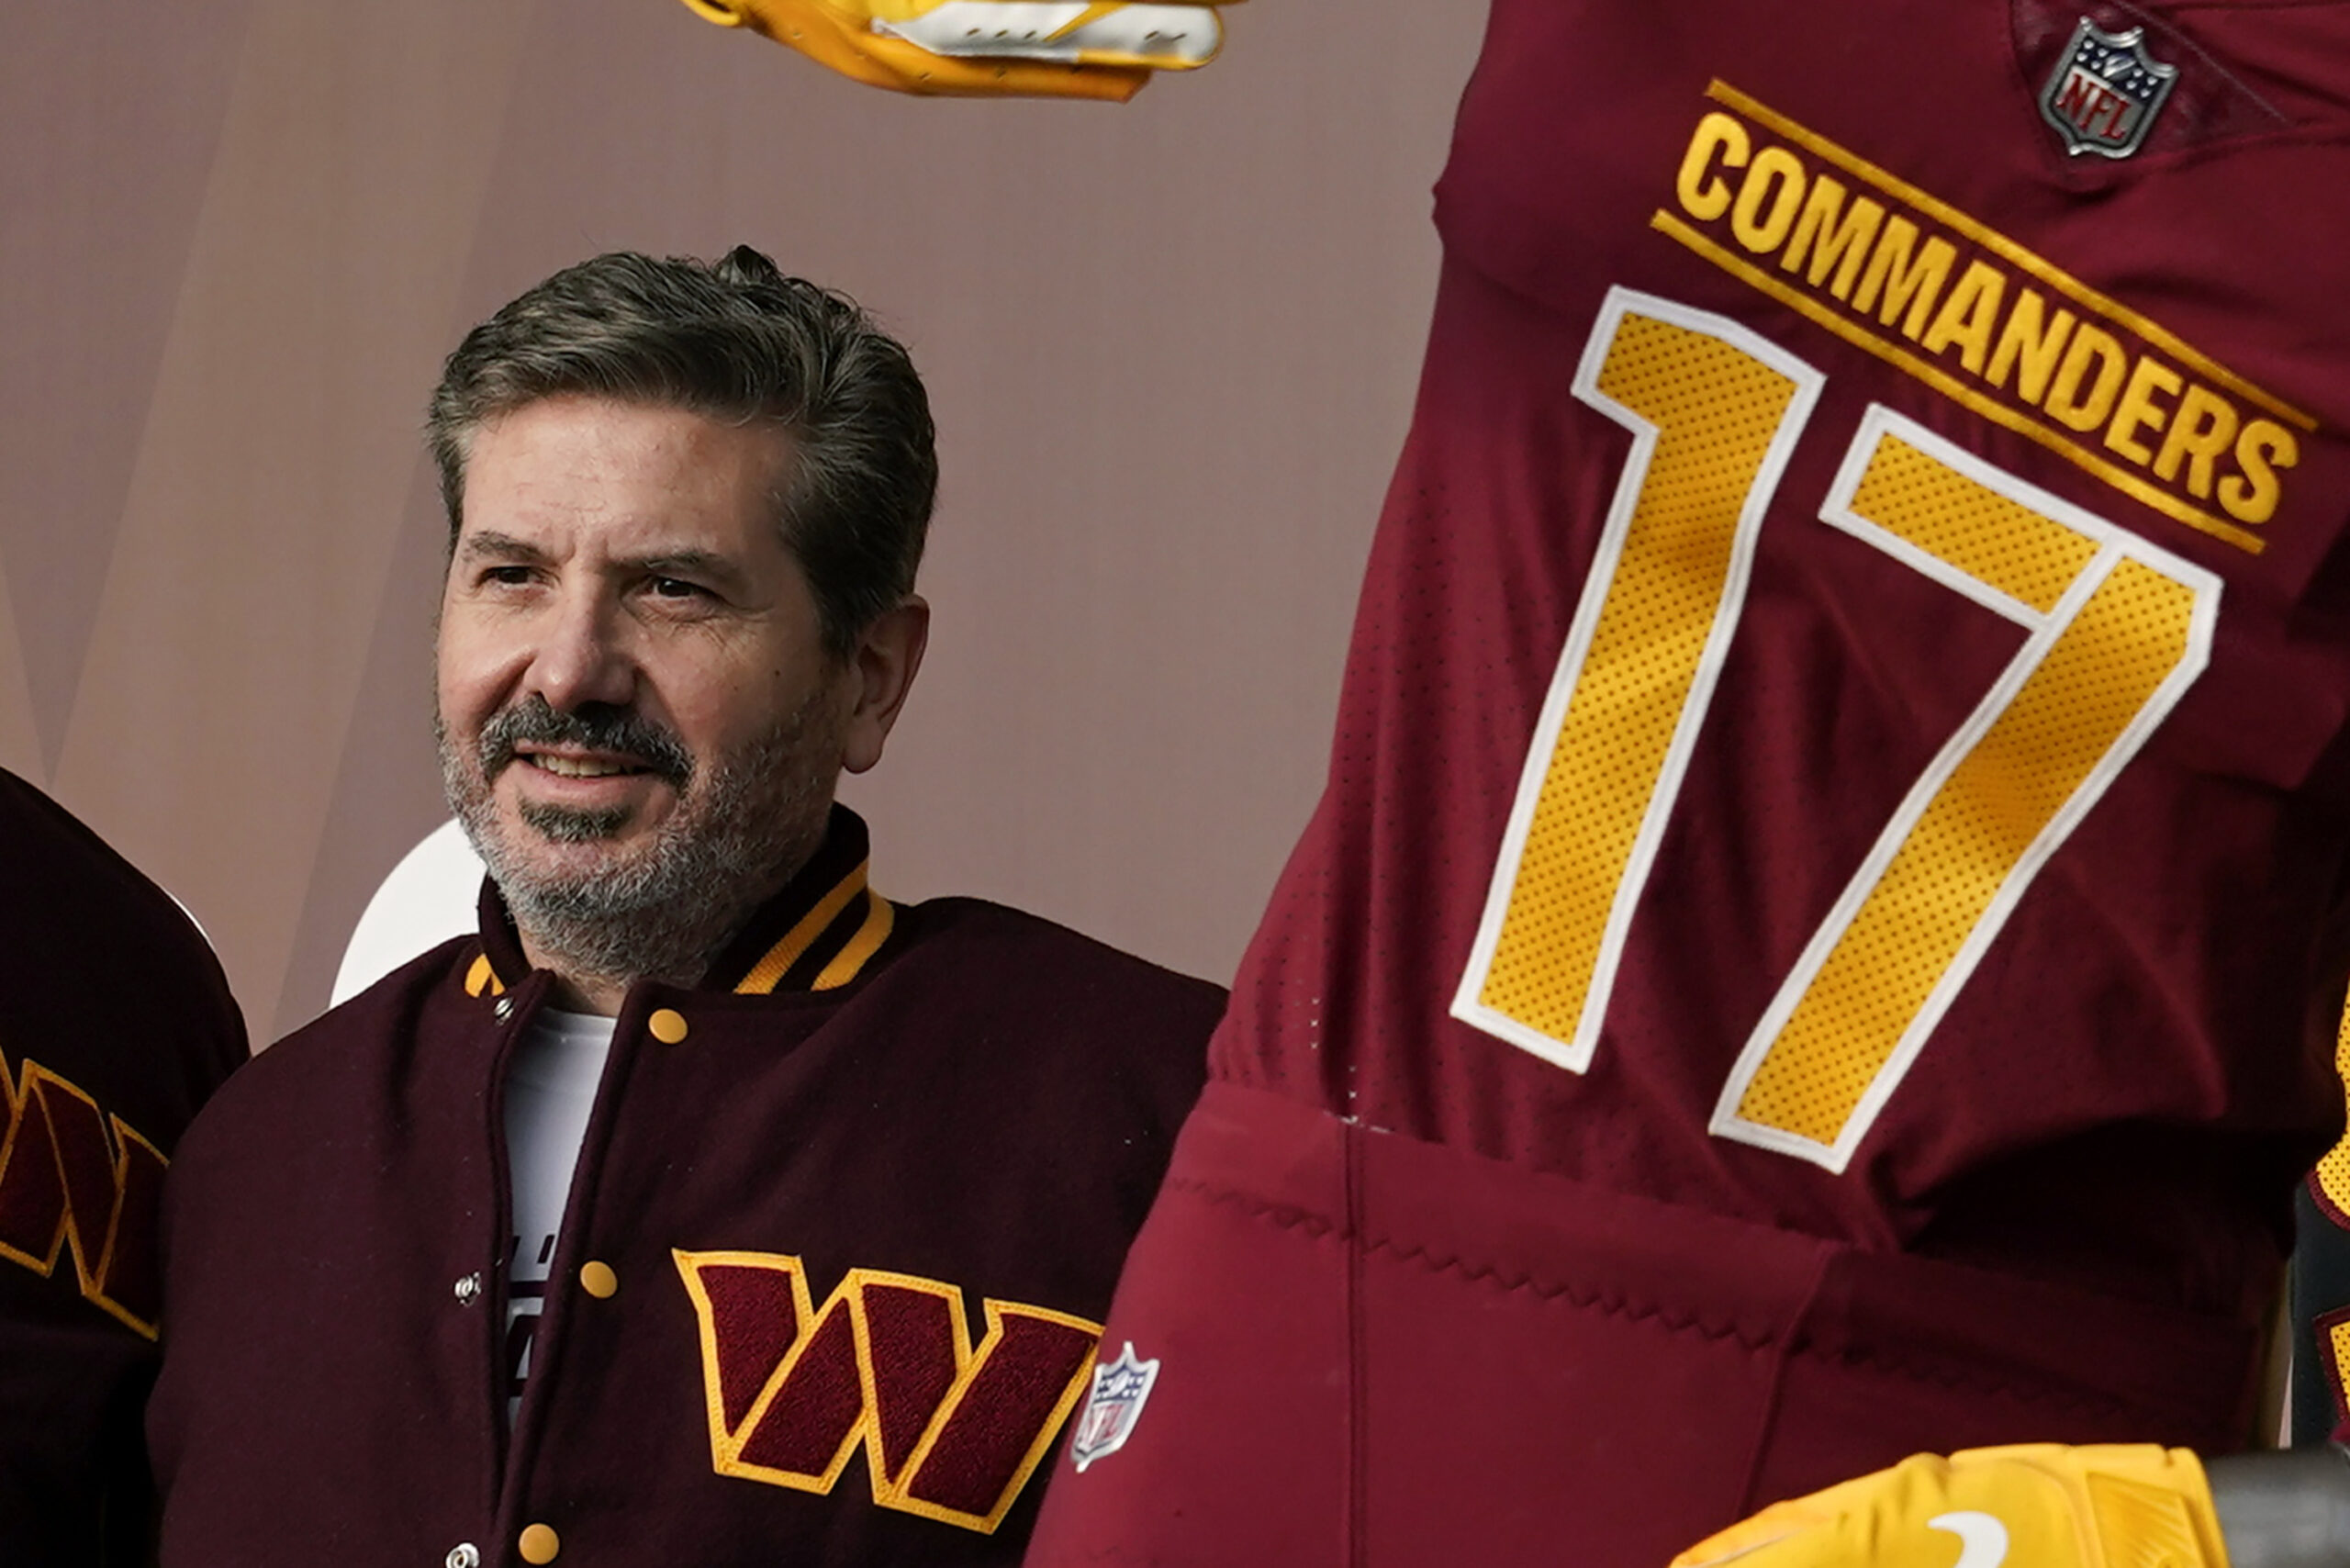 FILE - Washington Commanders' Dan Snyder poses for photos during an event to unveil the NFL football team's new identity, Wednesday, Feb. 2, 2022, in Landover, Md. Snyder is set to testify later Thursday morning, July 28, before a congressional committee that is investigating the NFL team’s history of workplace misconduct. (AP Photo/Patrick Semansky, File)